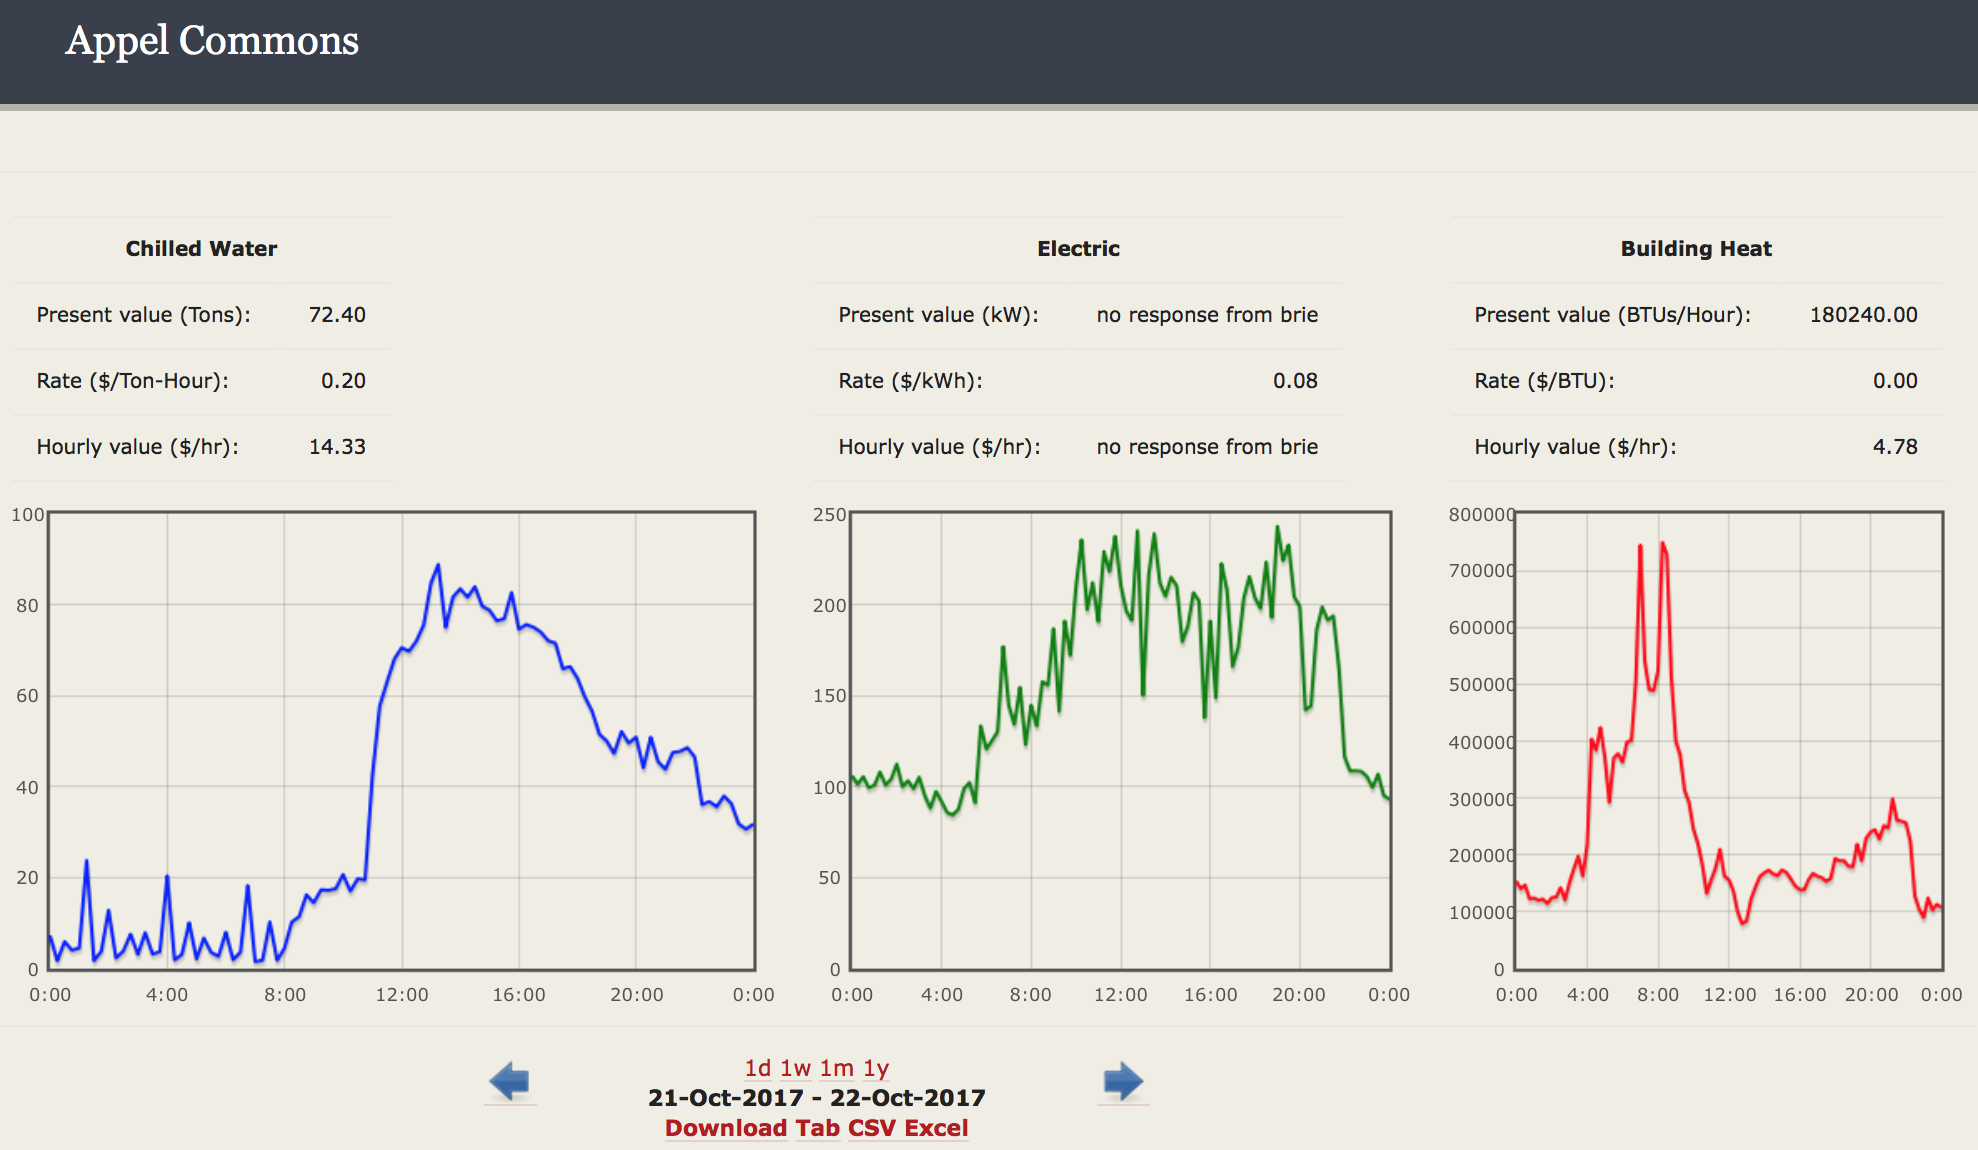 Screenshot of the EMCS portal with graphs of utilities for Appel Commons